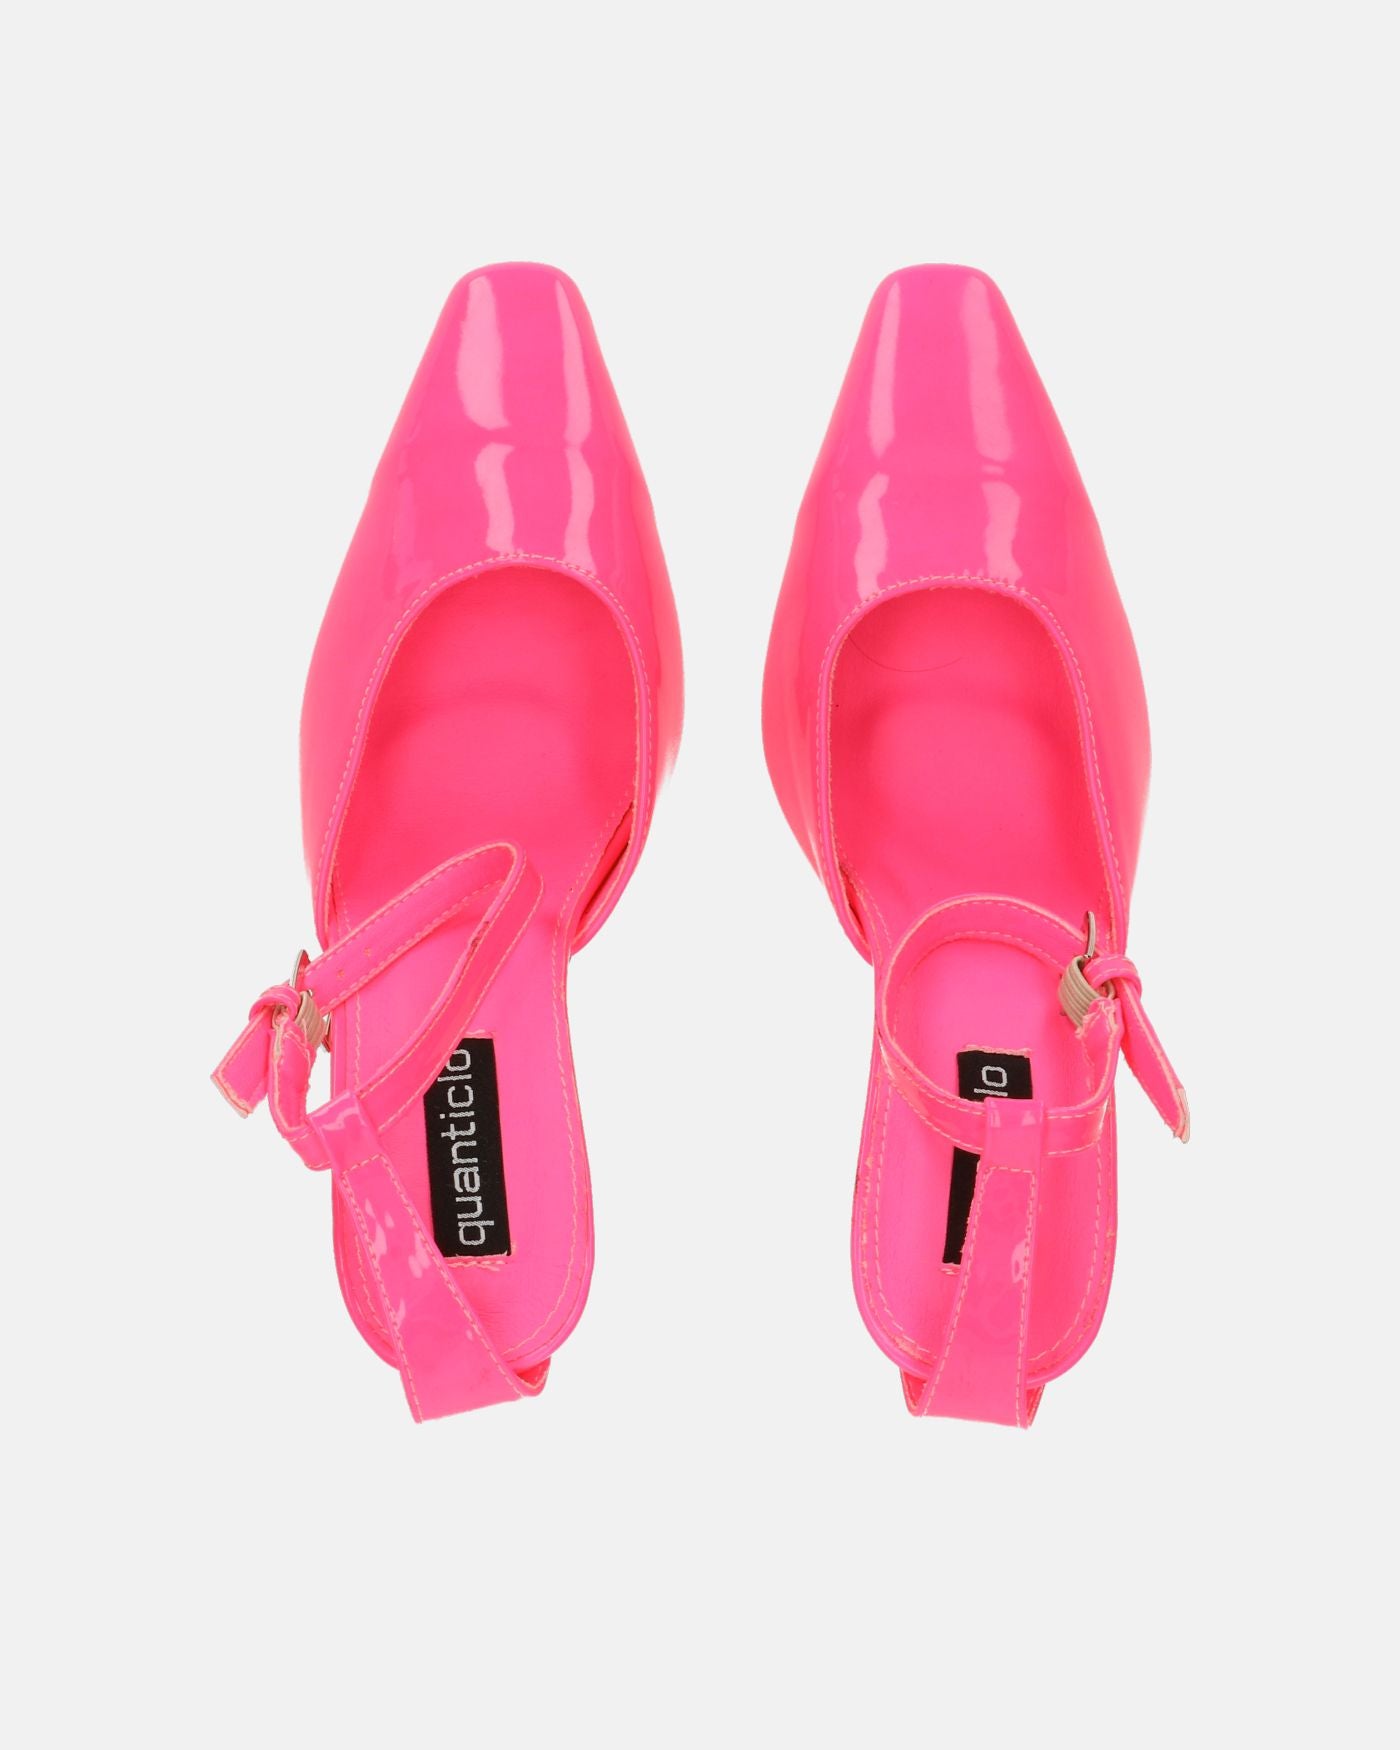 LUDWIKA - shoes with heel and strap in pink glassy